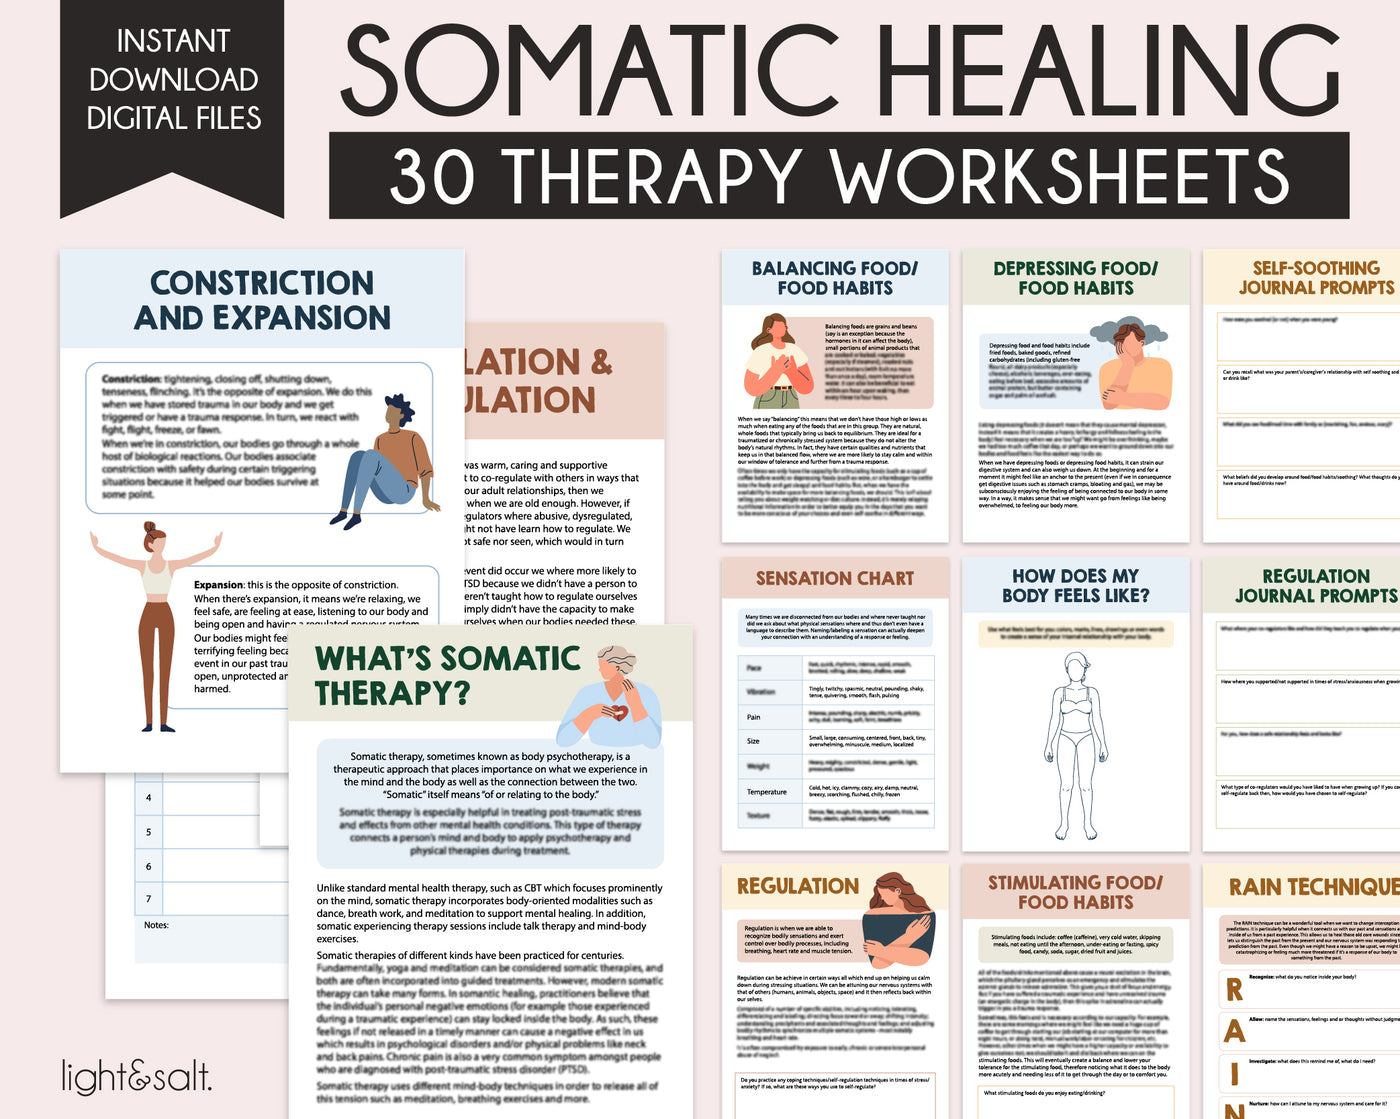 Somatic Healing workbook, somatic therapy worksheets